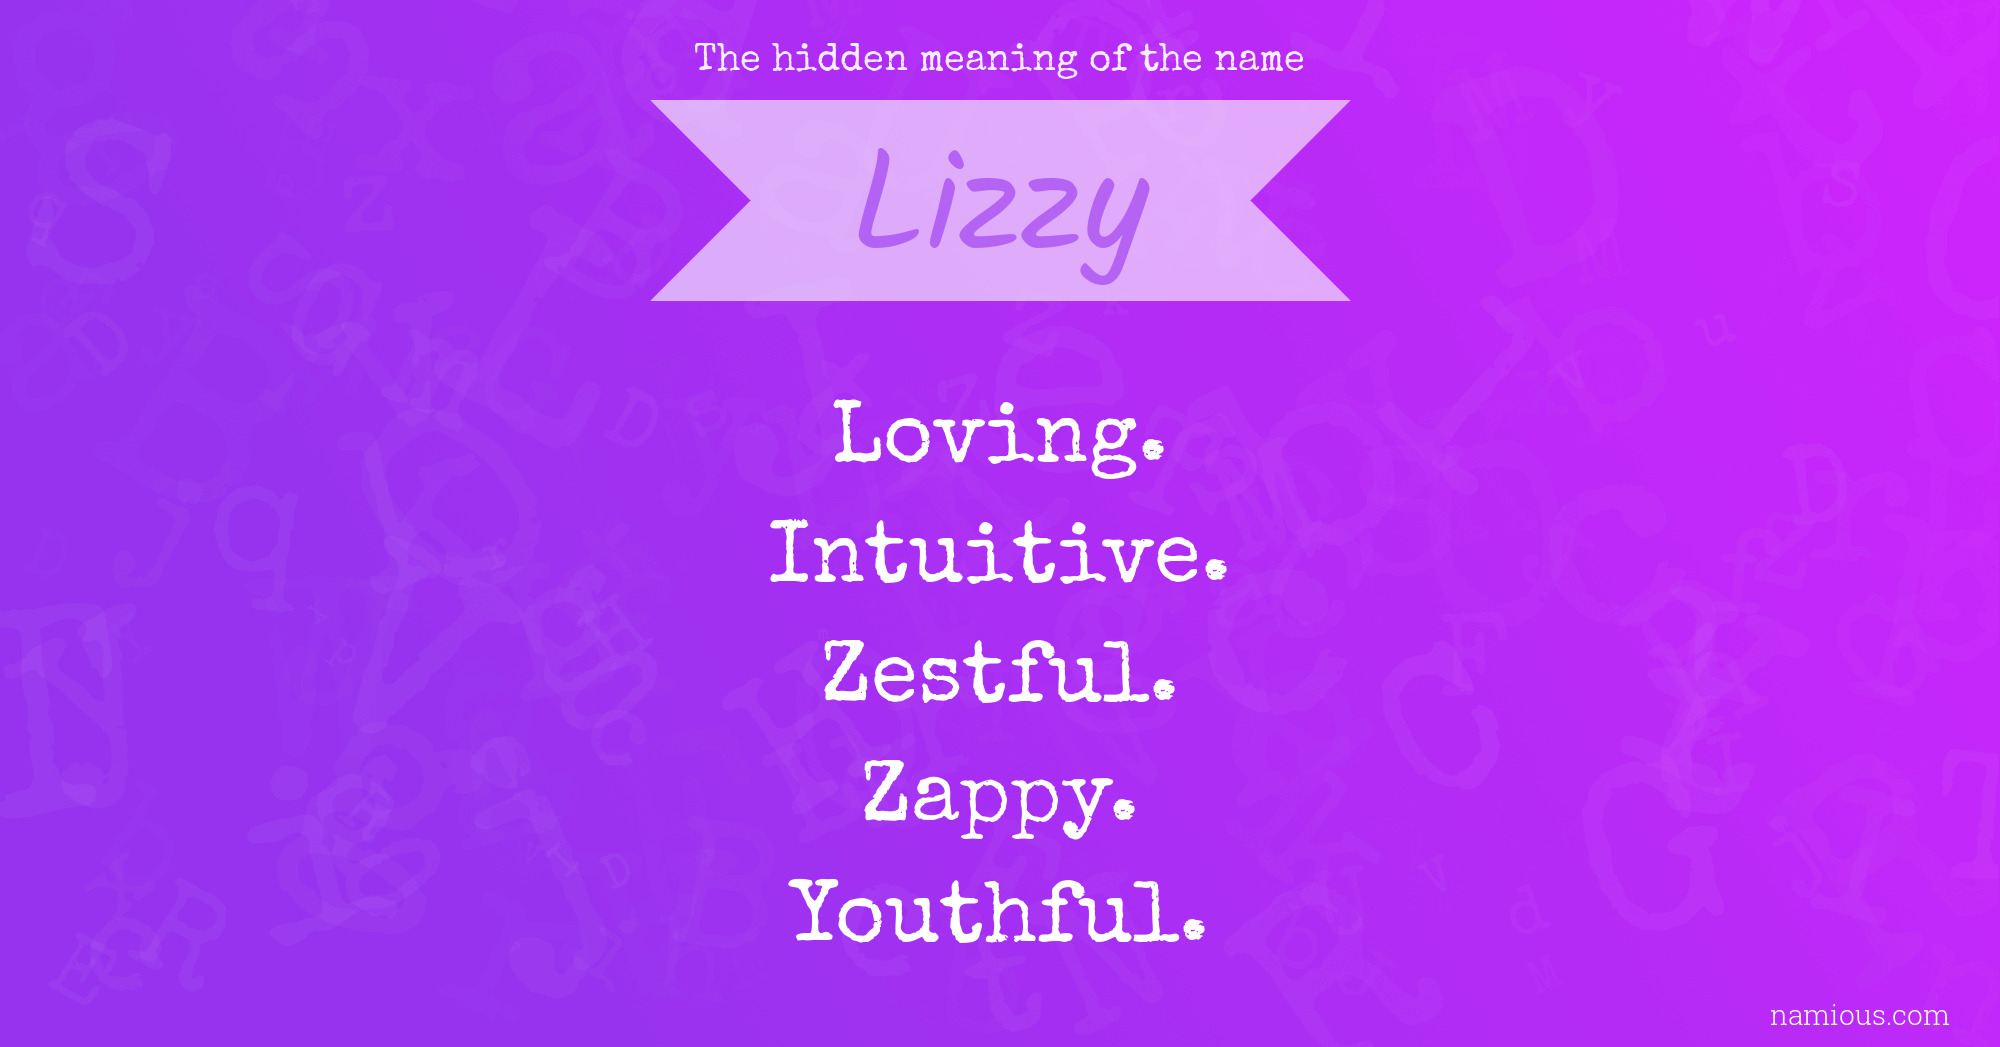 The hidden meaning of the name Lizzy